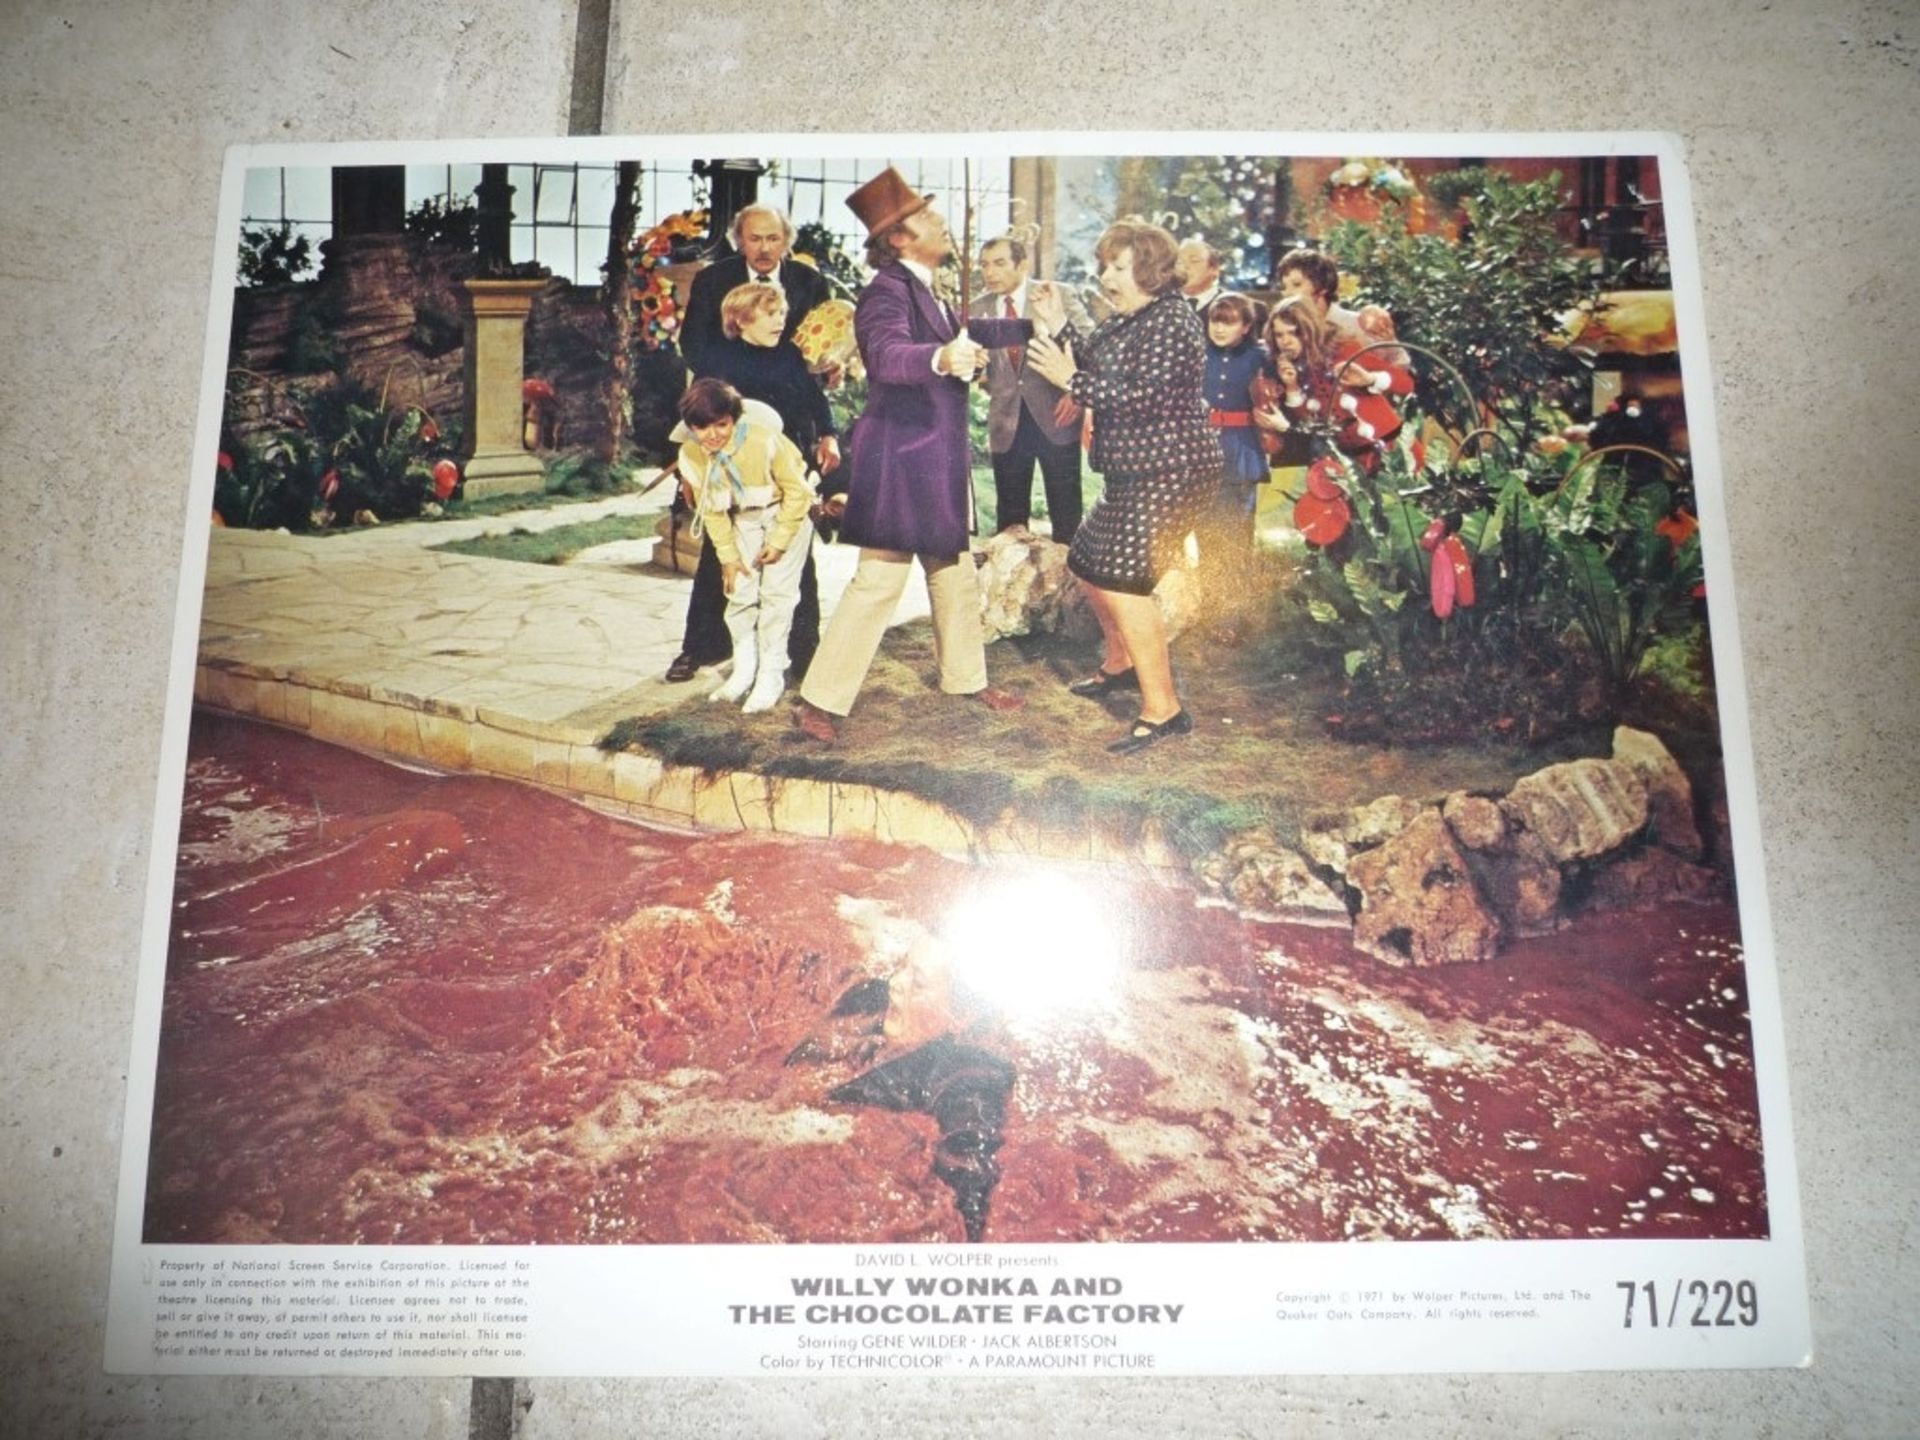 Willy Wonka and the Chocolate Factory lobby card